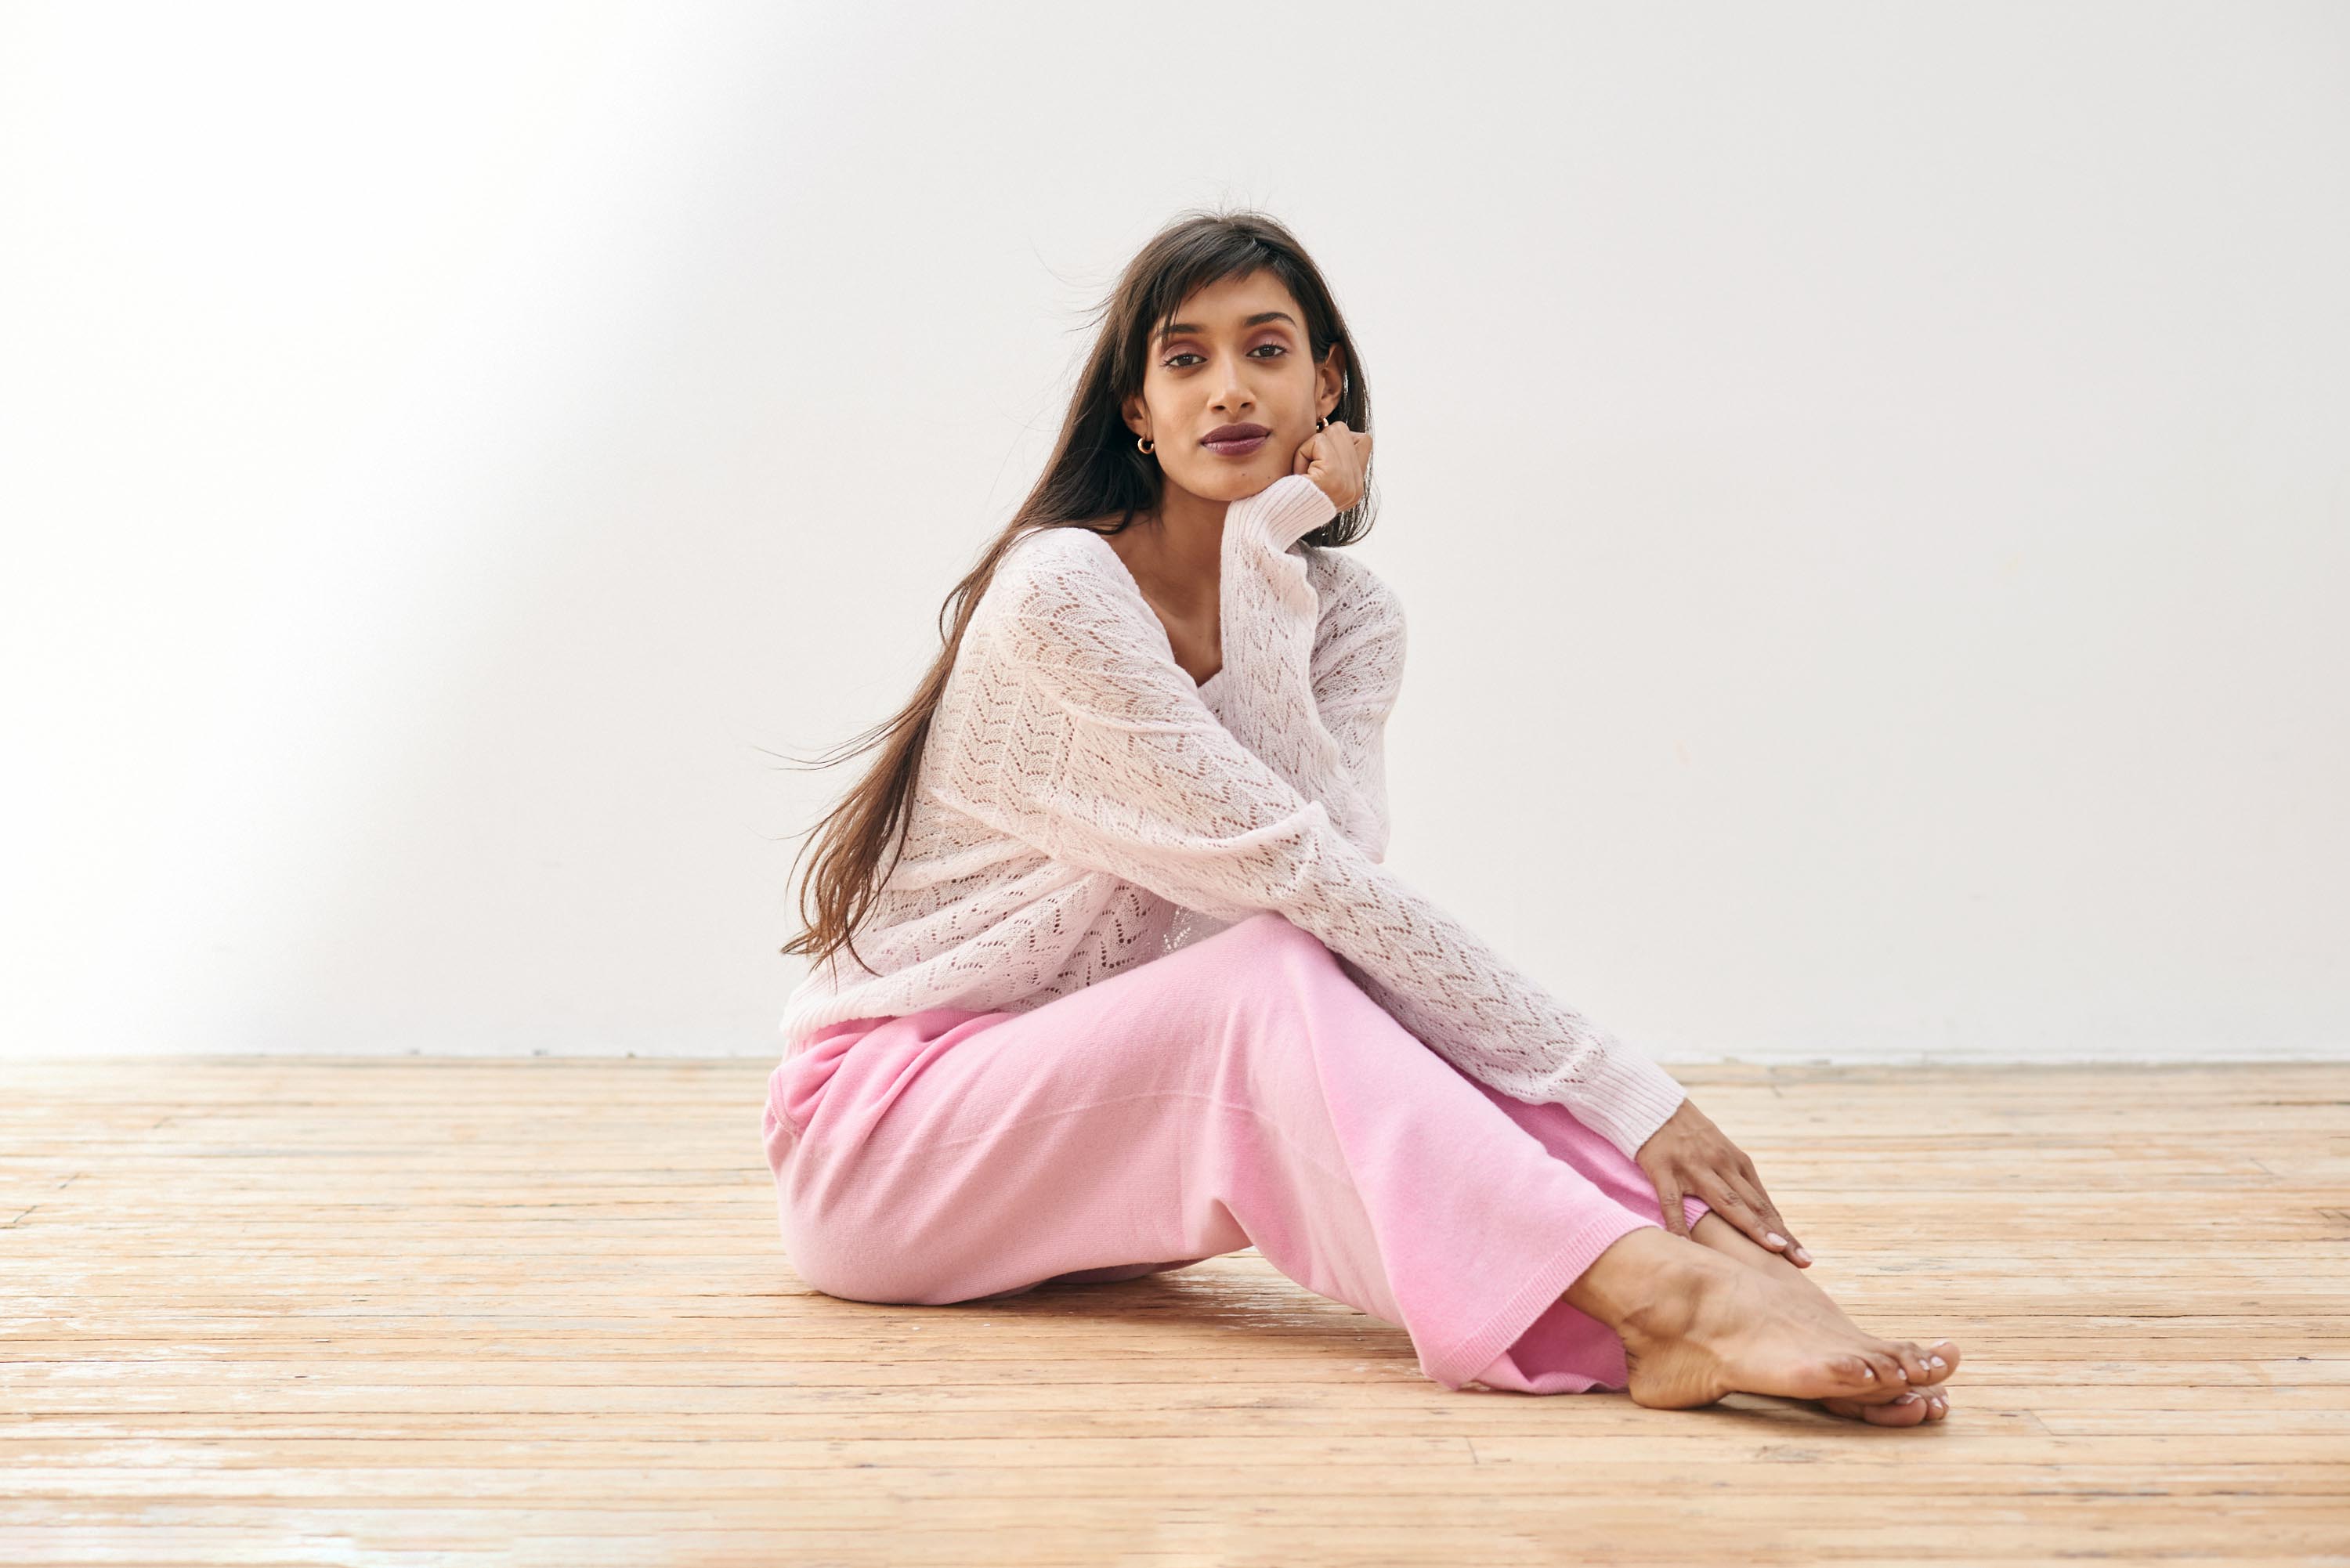 Brown haired female model wearing Jumper1234 pale pink lightweight merino "Lace Vee" sat on the floor